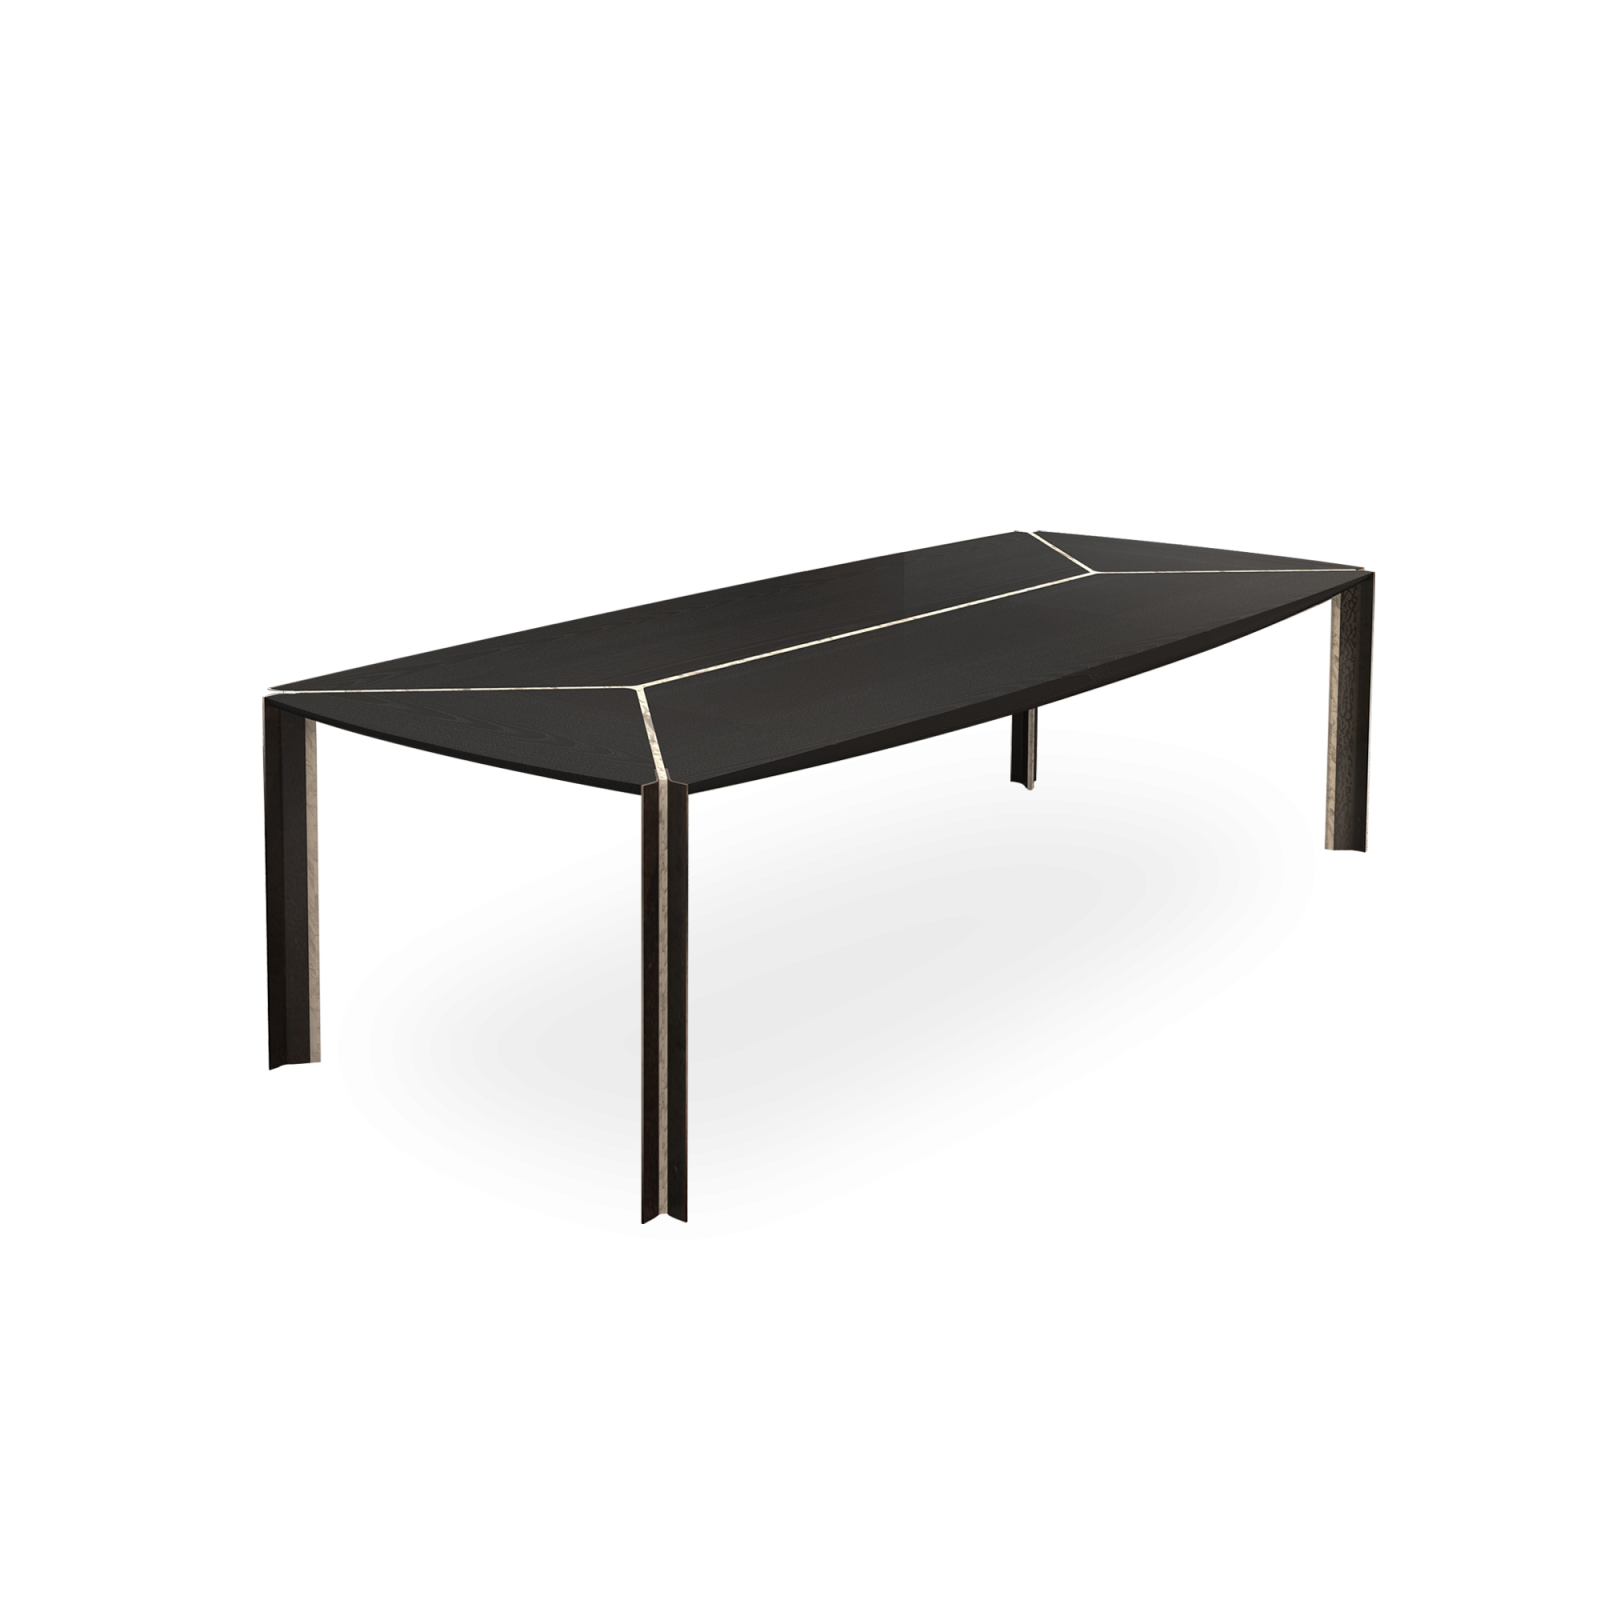 Foil Table consists of thin marble lines, curving forms, and metal legs standing on white background.